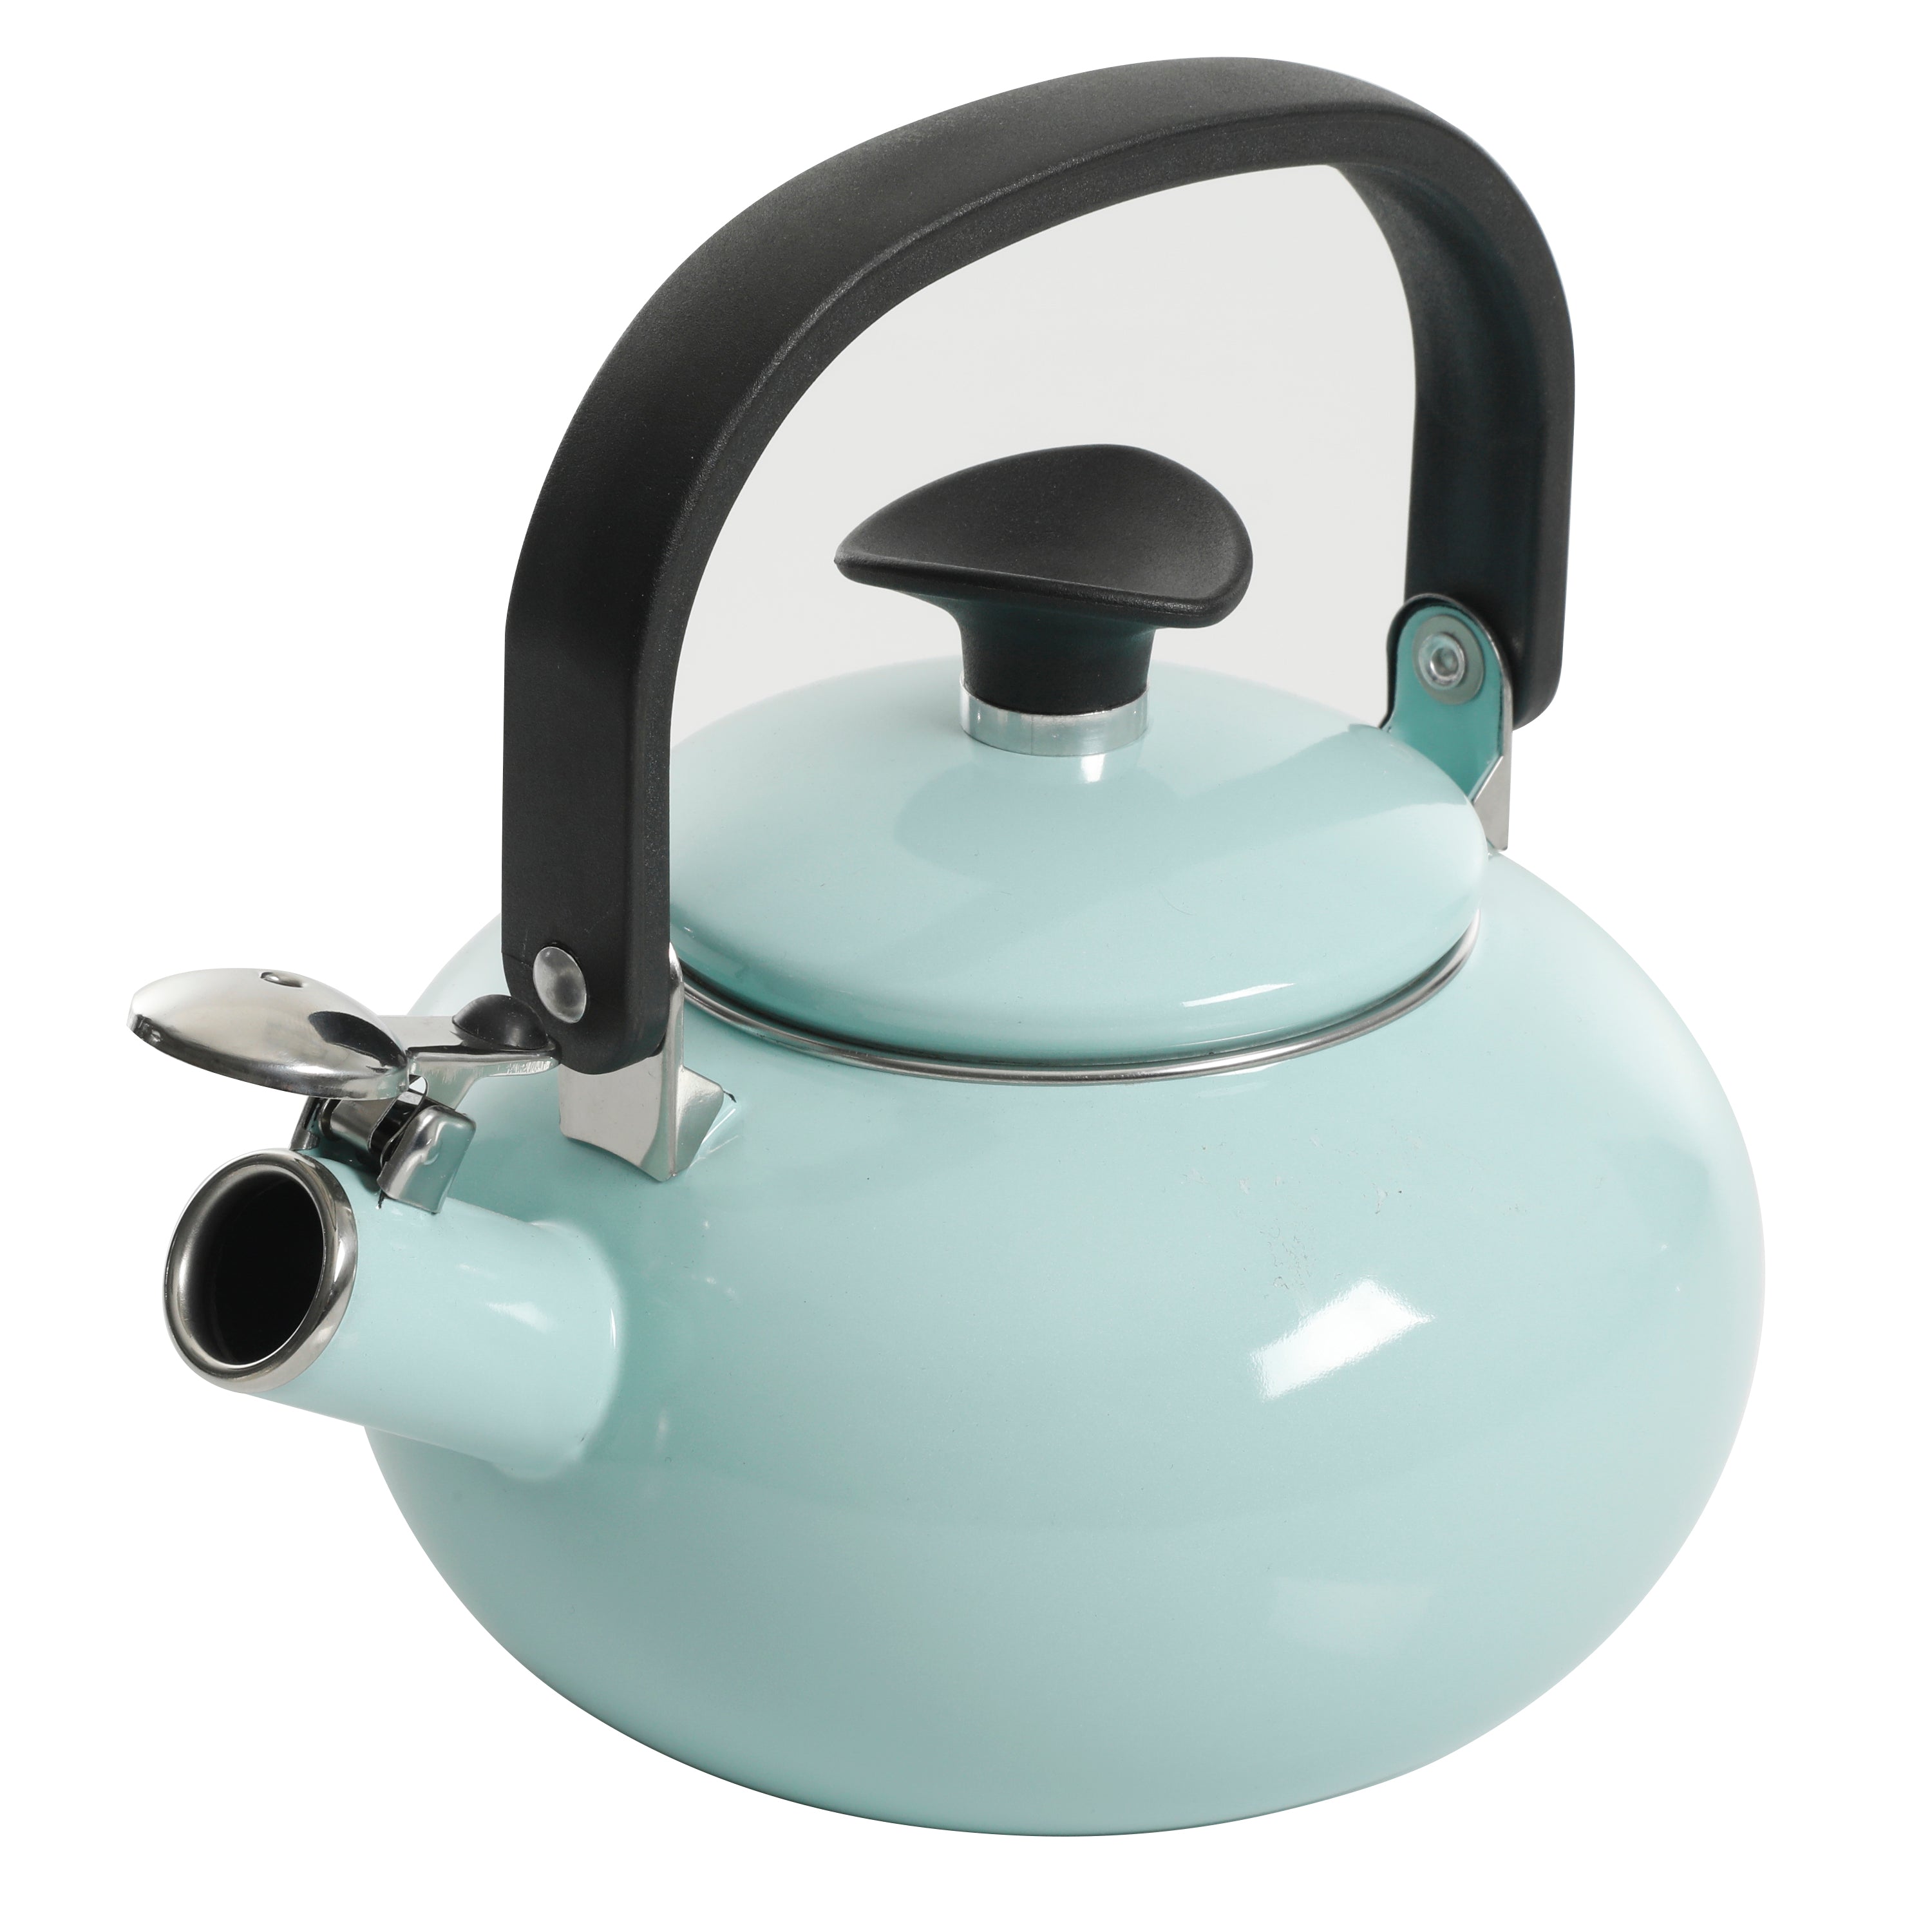 Whistling Tea Hot Water Kettle Stovetop Stainless Steel 2 Quart Gas  Electric Induction Stove Top Teapot Blue 